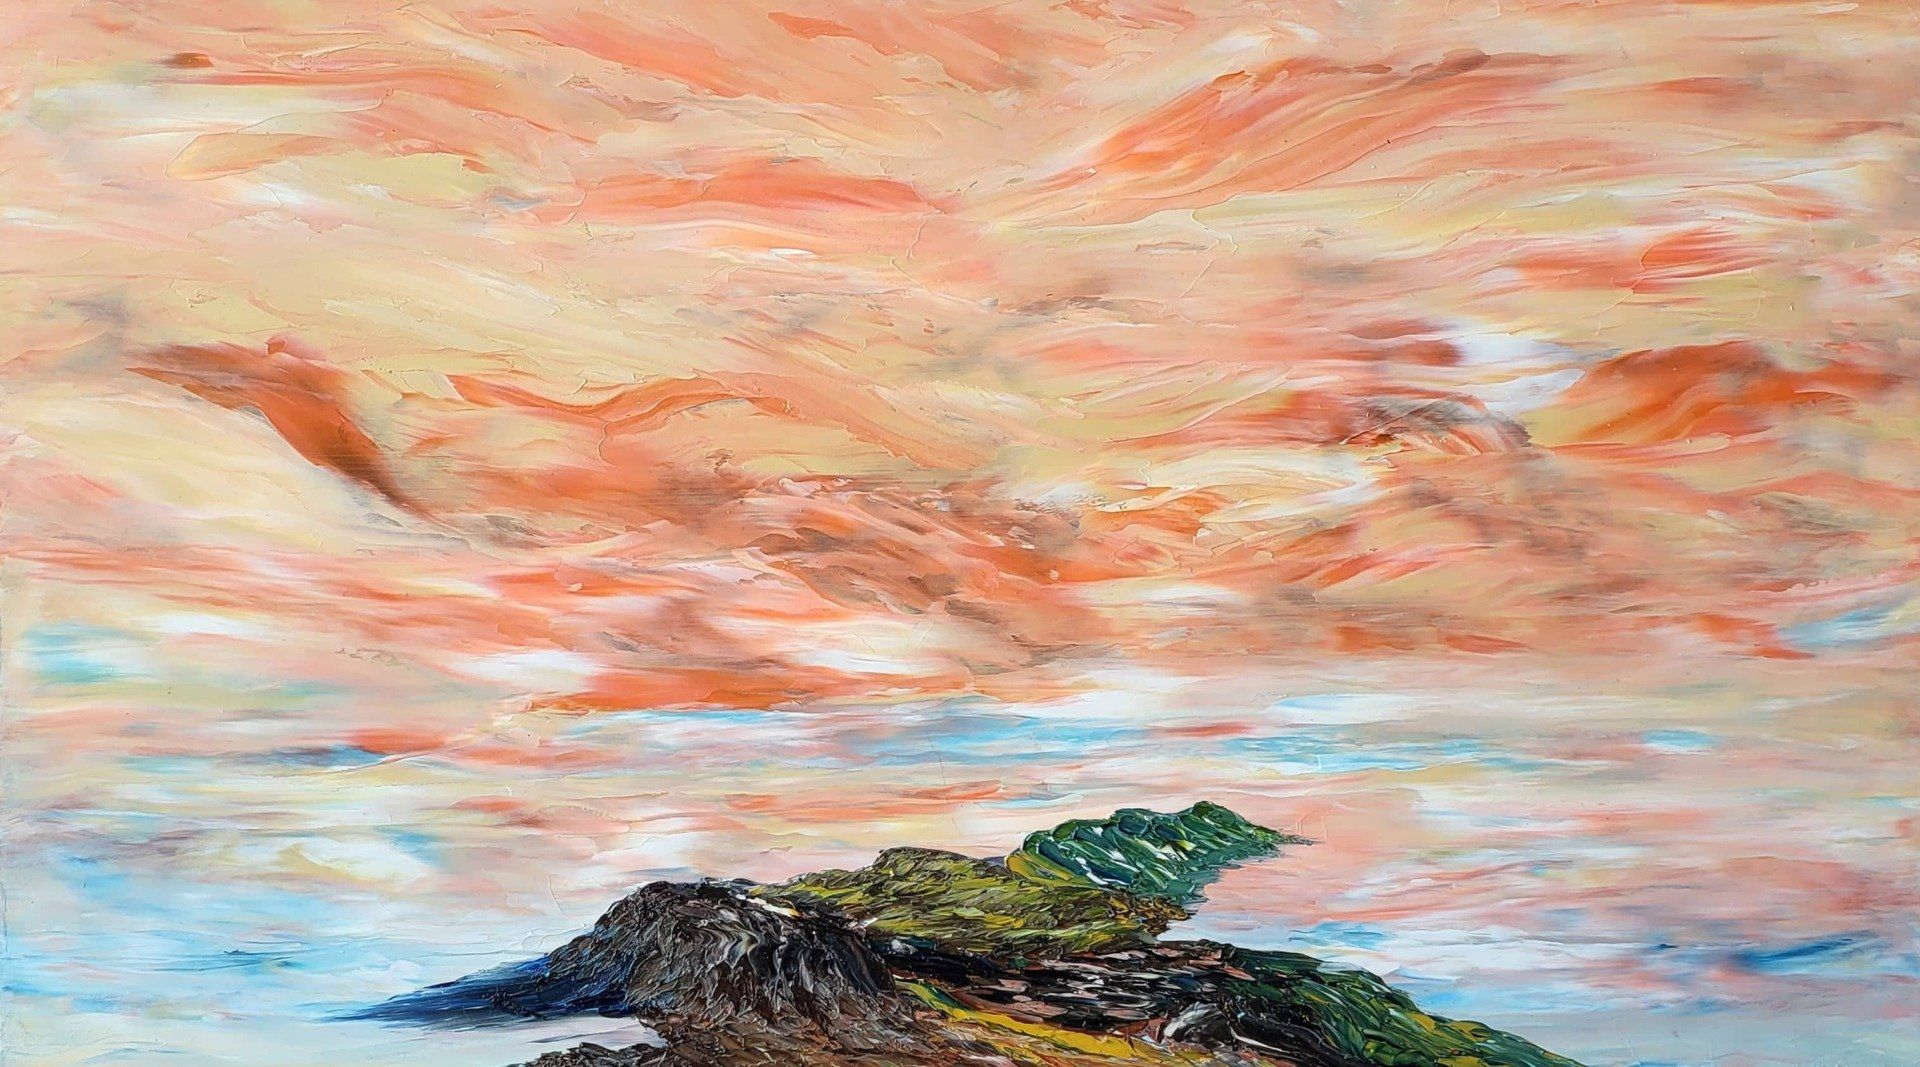 Island Just for you (14) Oil on Masonite 20 in. x11 in. This Island diverges from the usual pallet of colours. I used Scarlet Lake (a deep brilliant red. This is blended with Naples Yellow, Prussian Blue and white. Some morning sunrises give off that glorious subtle pinkish-red. The Island is as inviting as the other Islands in the collection with added features of multiple access points and caves. It also extends way into the horizon.